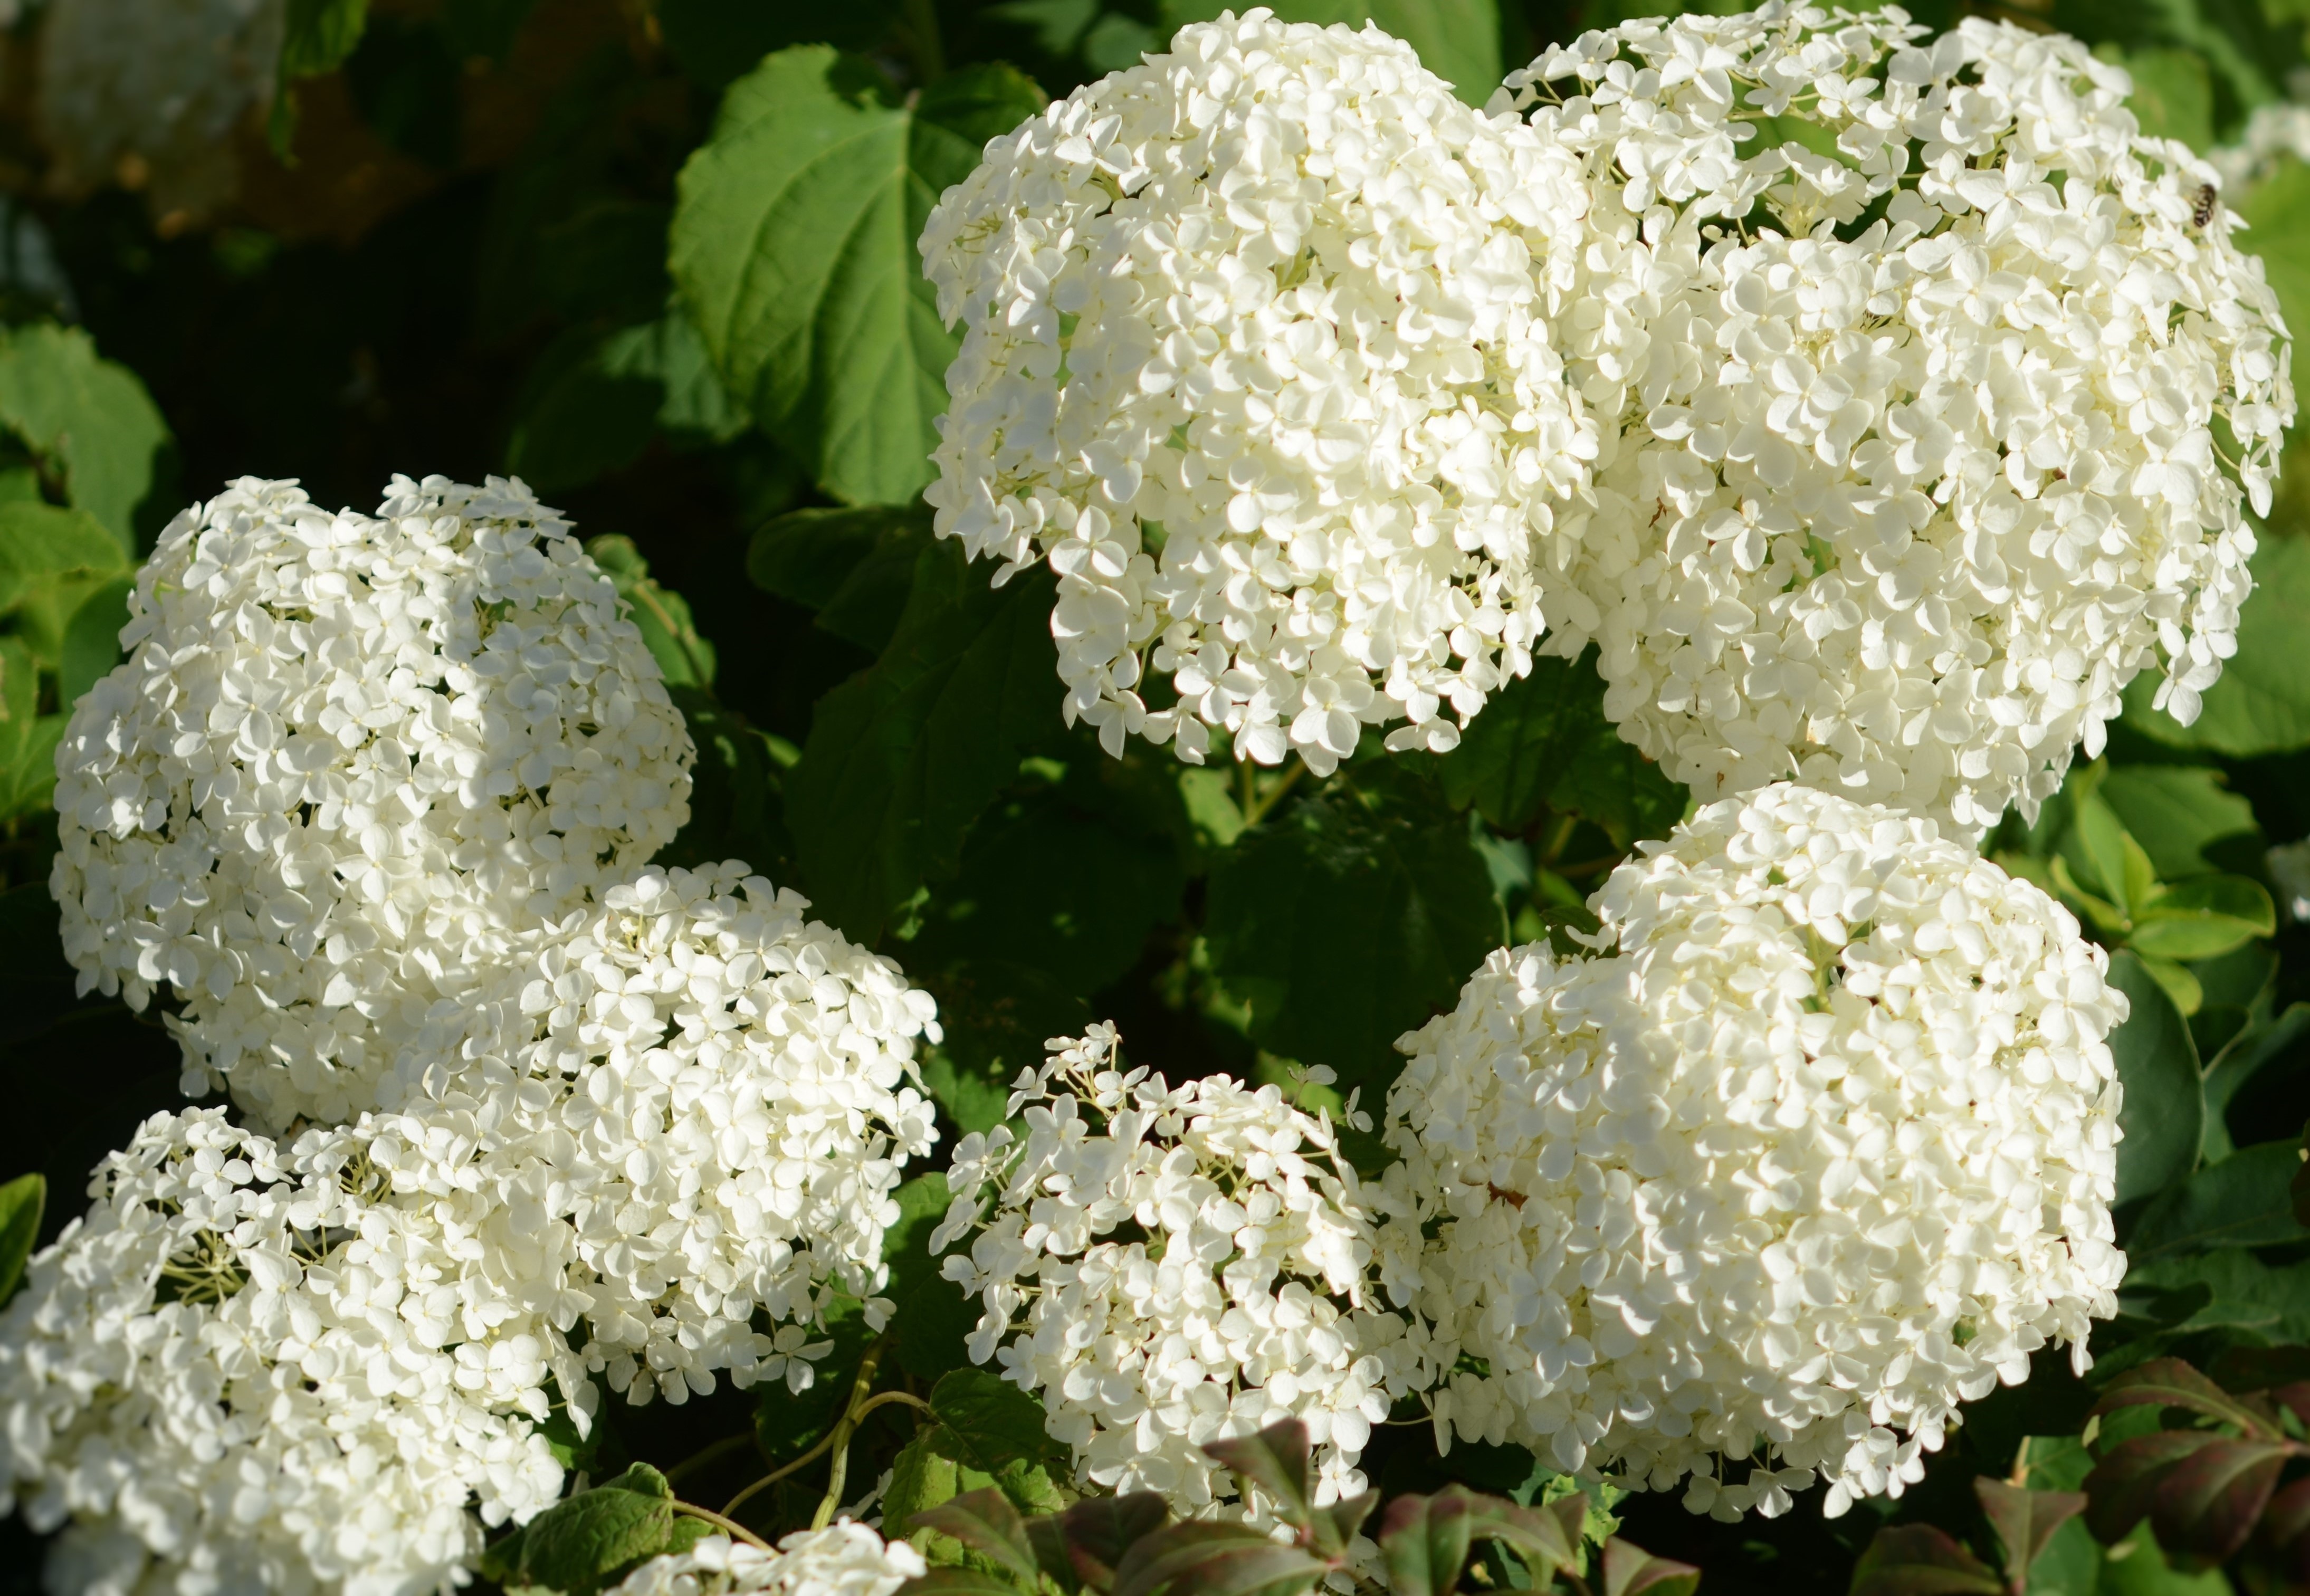 white petaled cluster flowers close up focus photo